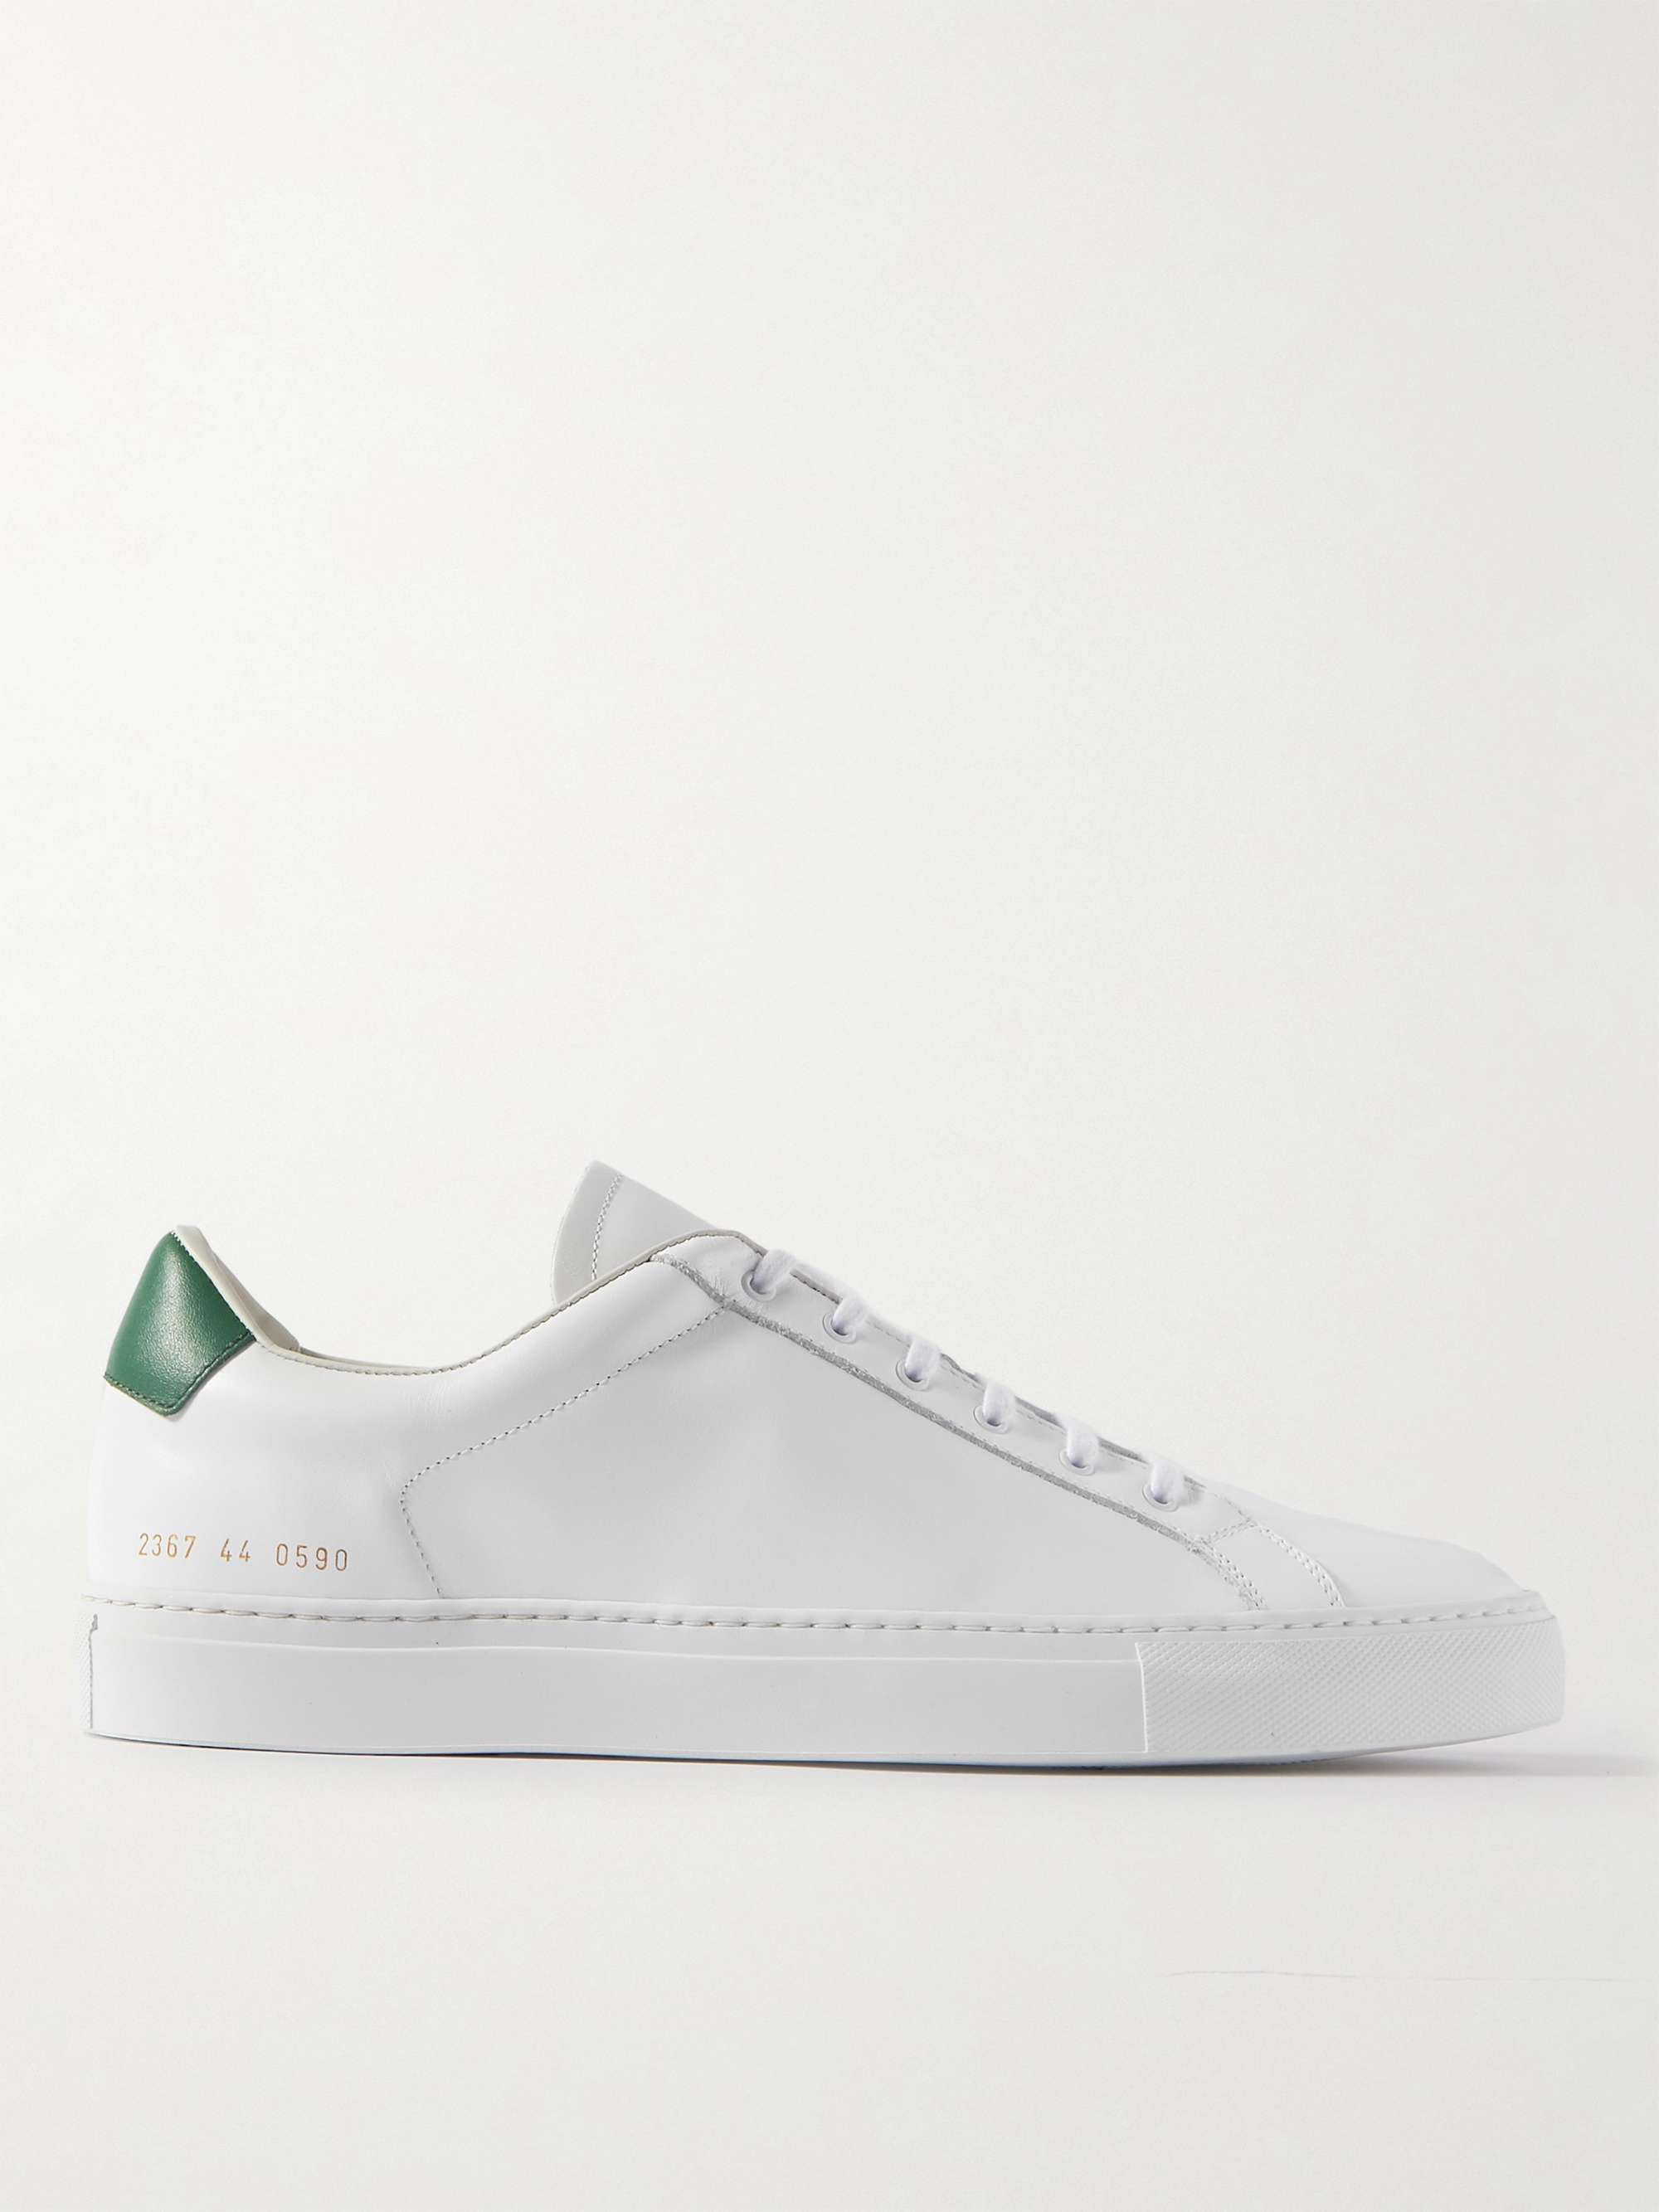 COMMON PROJECTS Retro Low Leather Sneakers | MR PORTER